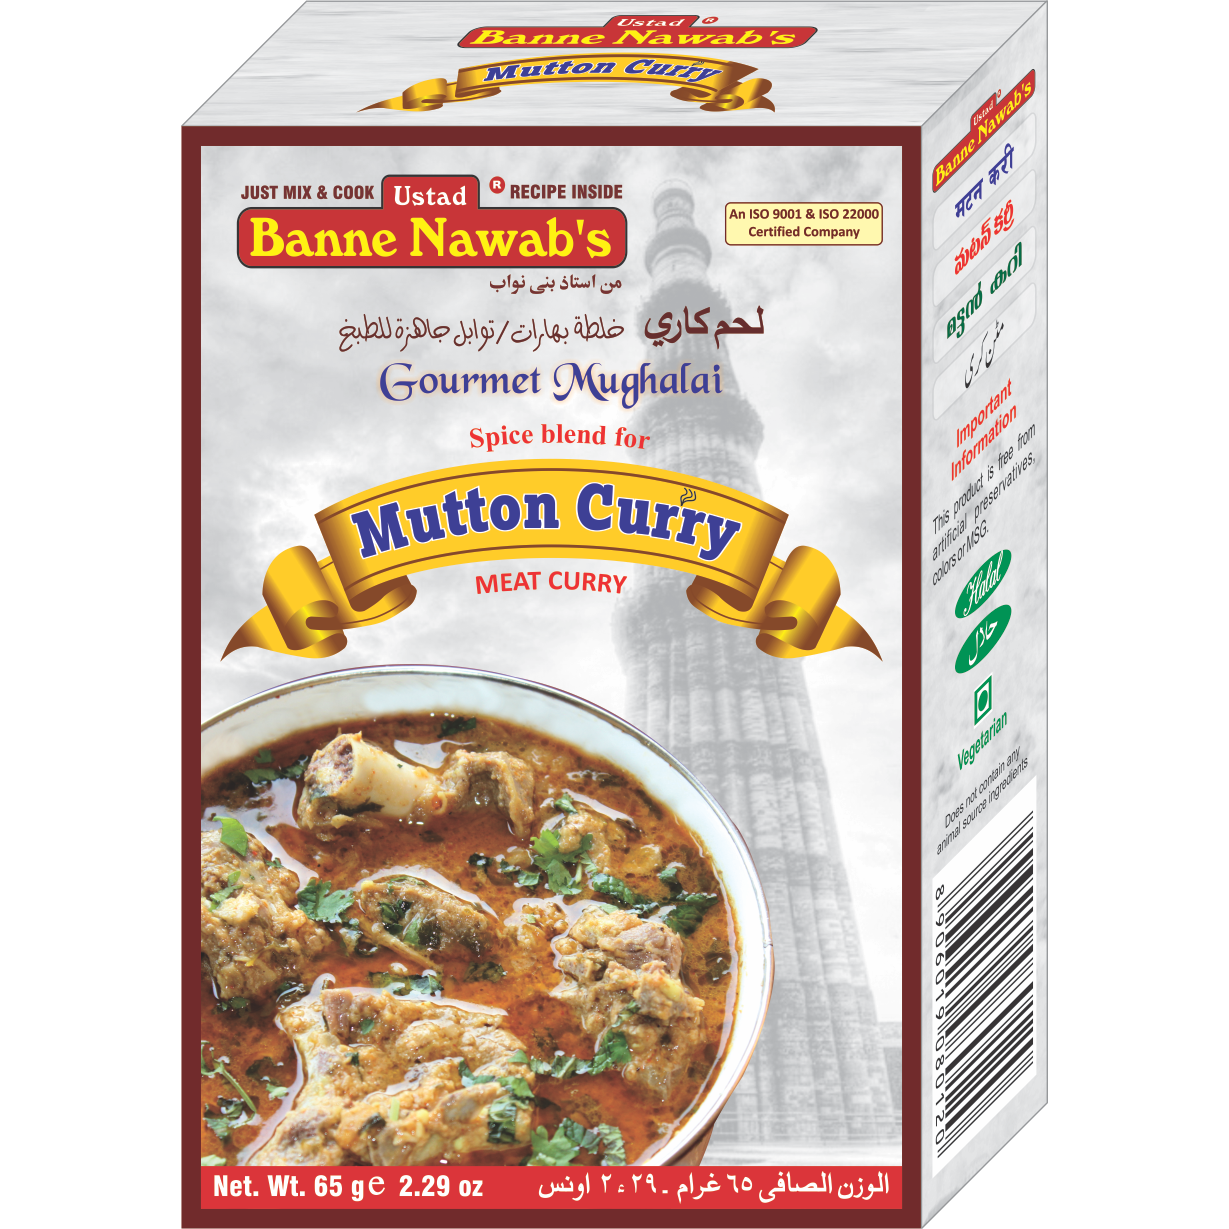 Pack of 2 - Ustad Banne Nawab's Mutton Curry - 65 Gm (2.29 Oz)